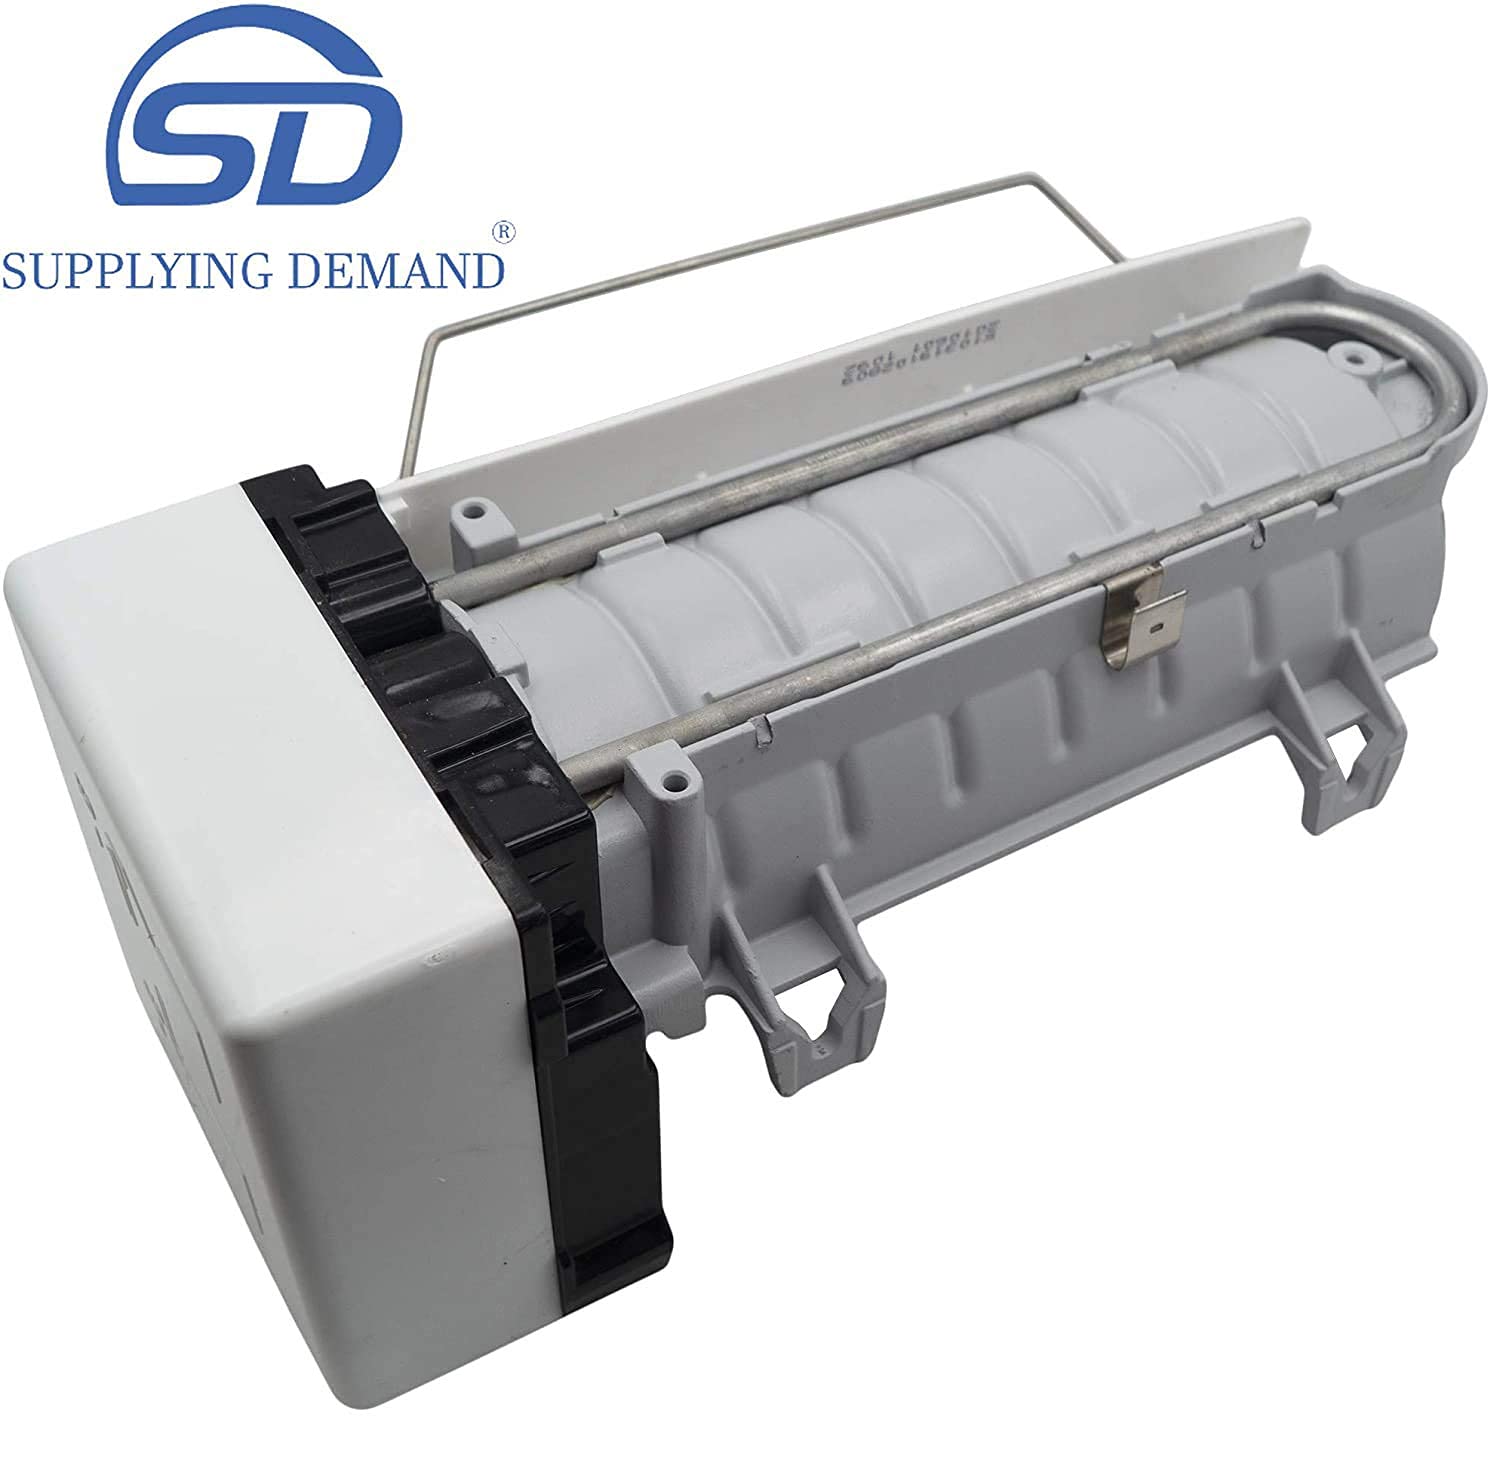 Generic Supplying Demand D7824706Q 10549201 10563707 Refrigerator Ice Maker Replacement Model Specific Not Universal